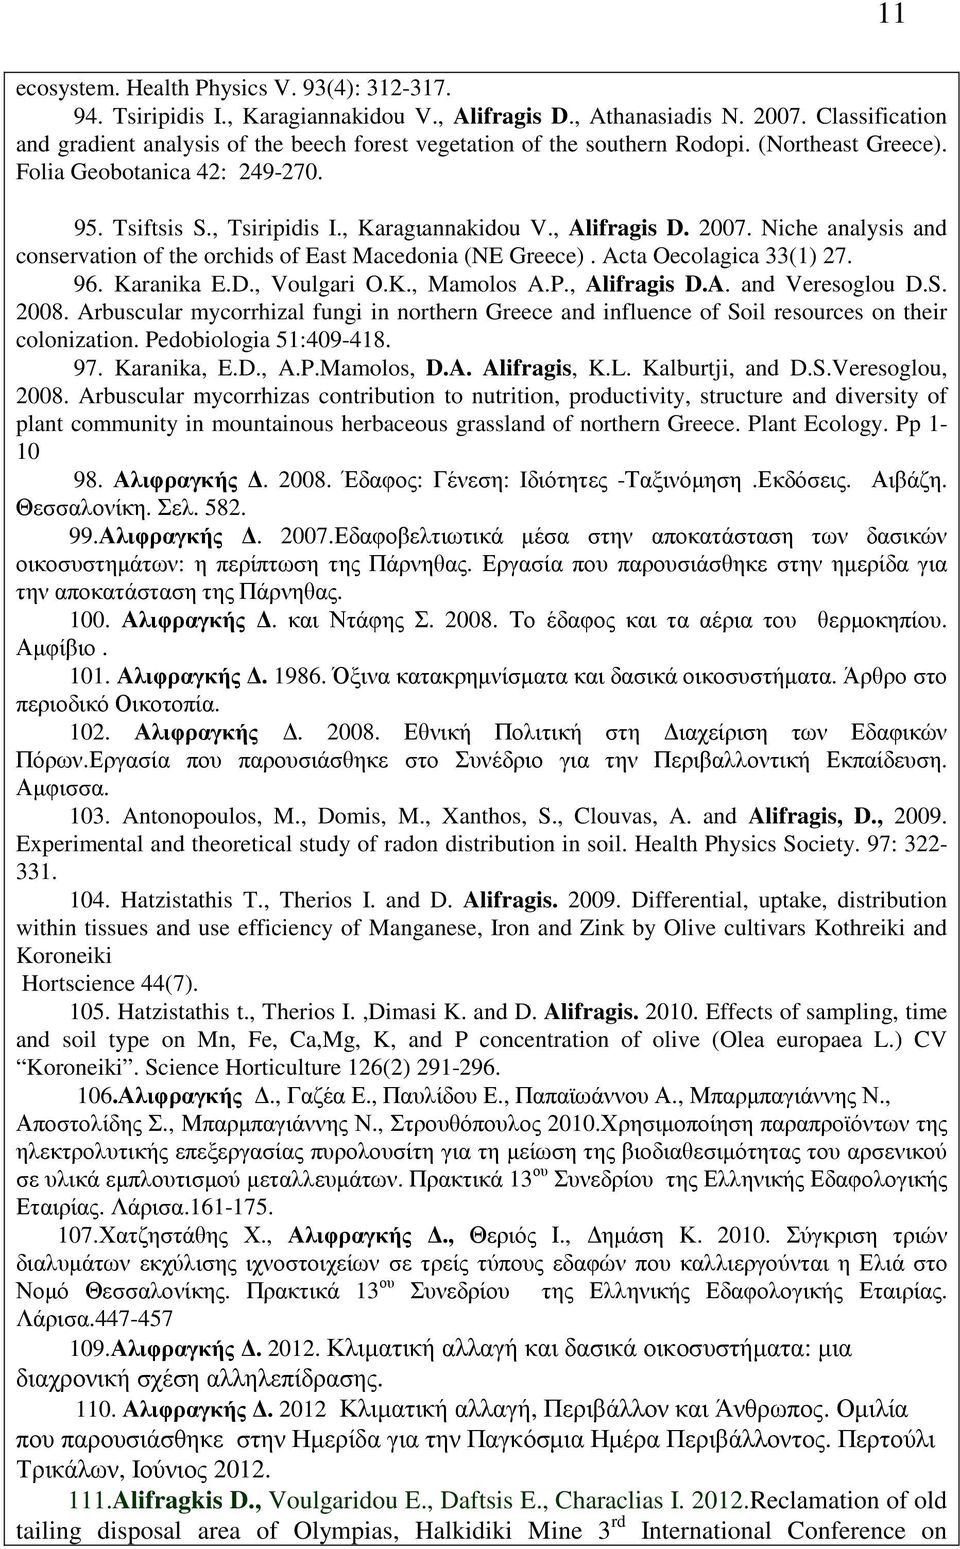 , Alifragis D. 2007. Niche analysis and conservation of the orchids of East Macedonia (NE Greece). Acta Oecolagica 33(1) 27. 96. Karanika E.D., Voulgari O.K., Mamolos A.P., Alifragis D.A. and Veresoglou D.